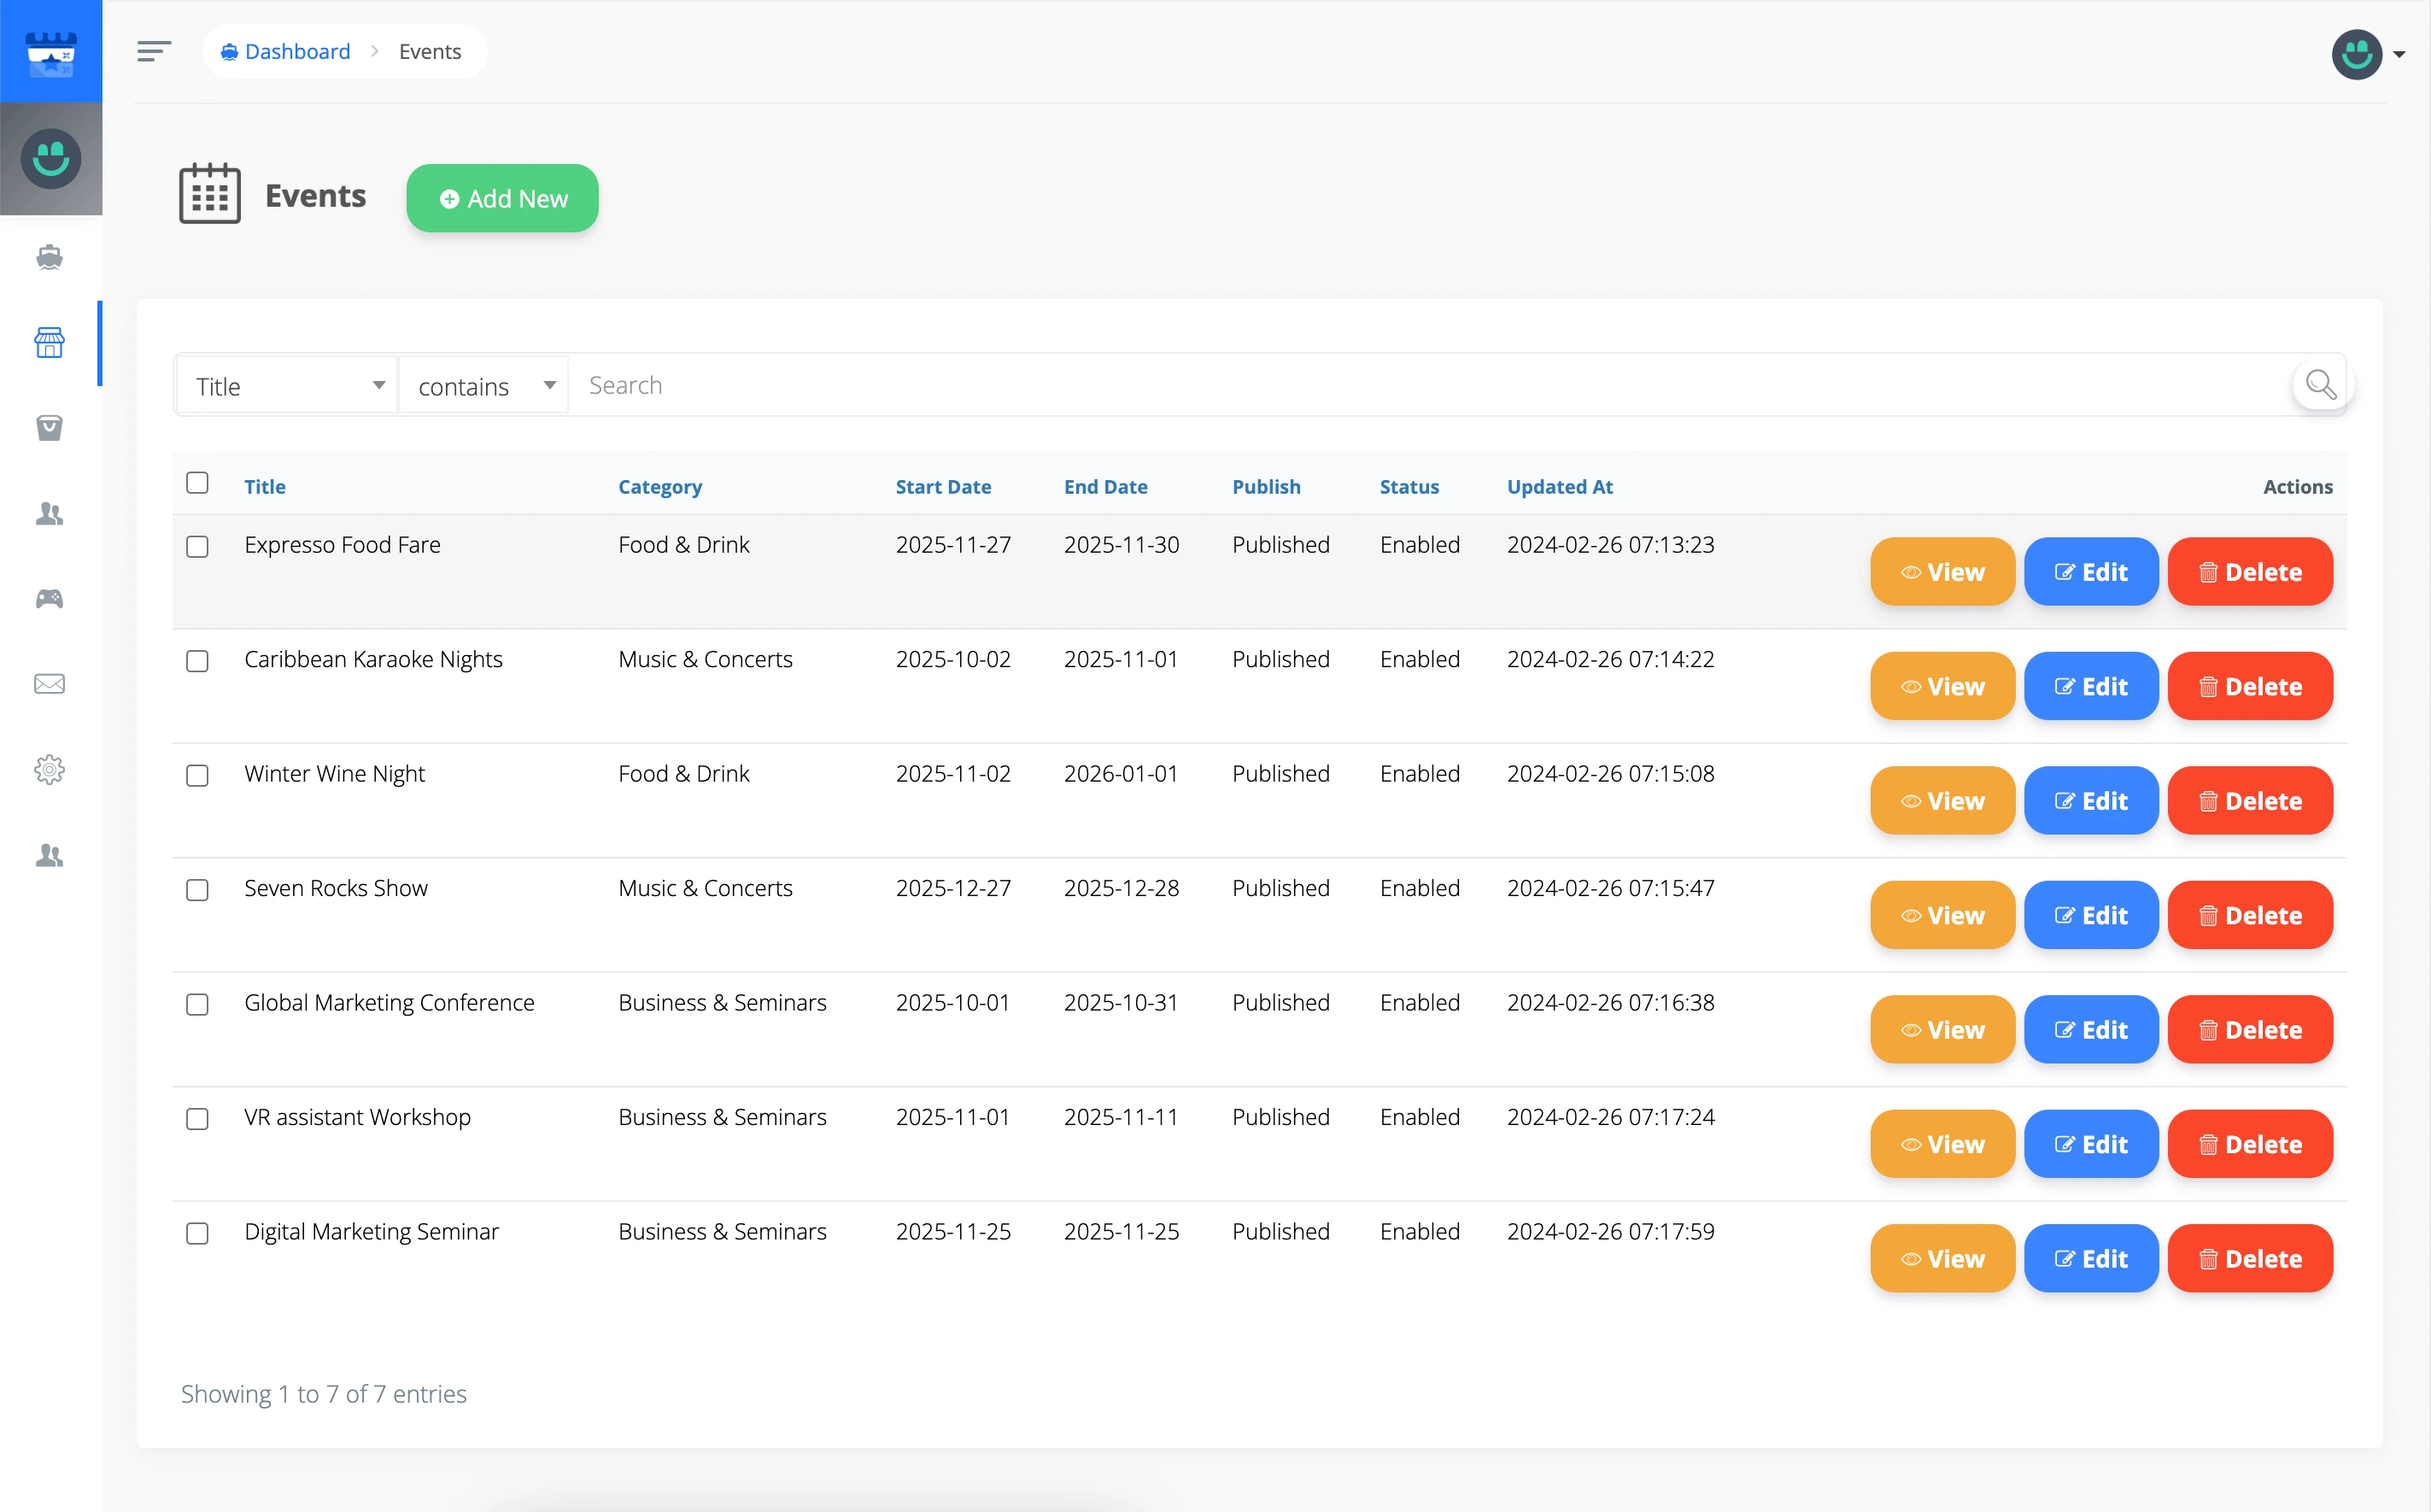 Admin Panel - Manage Events